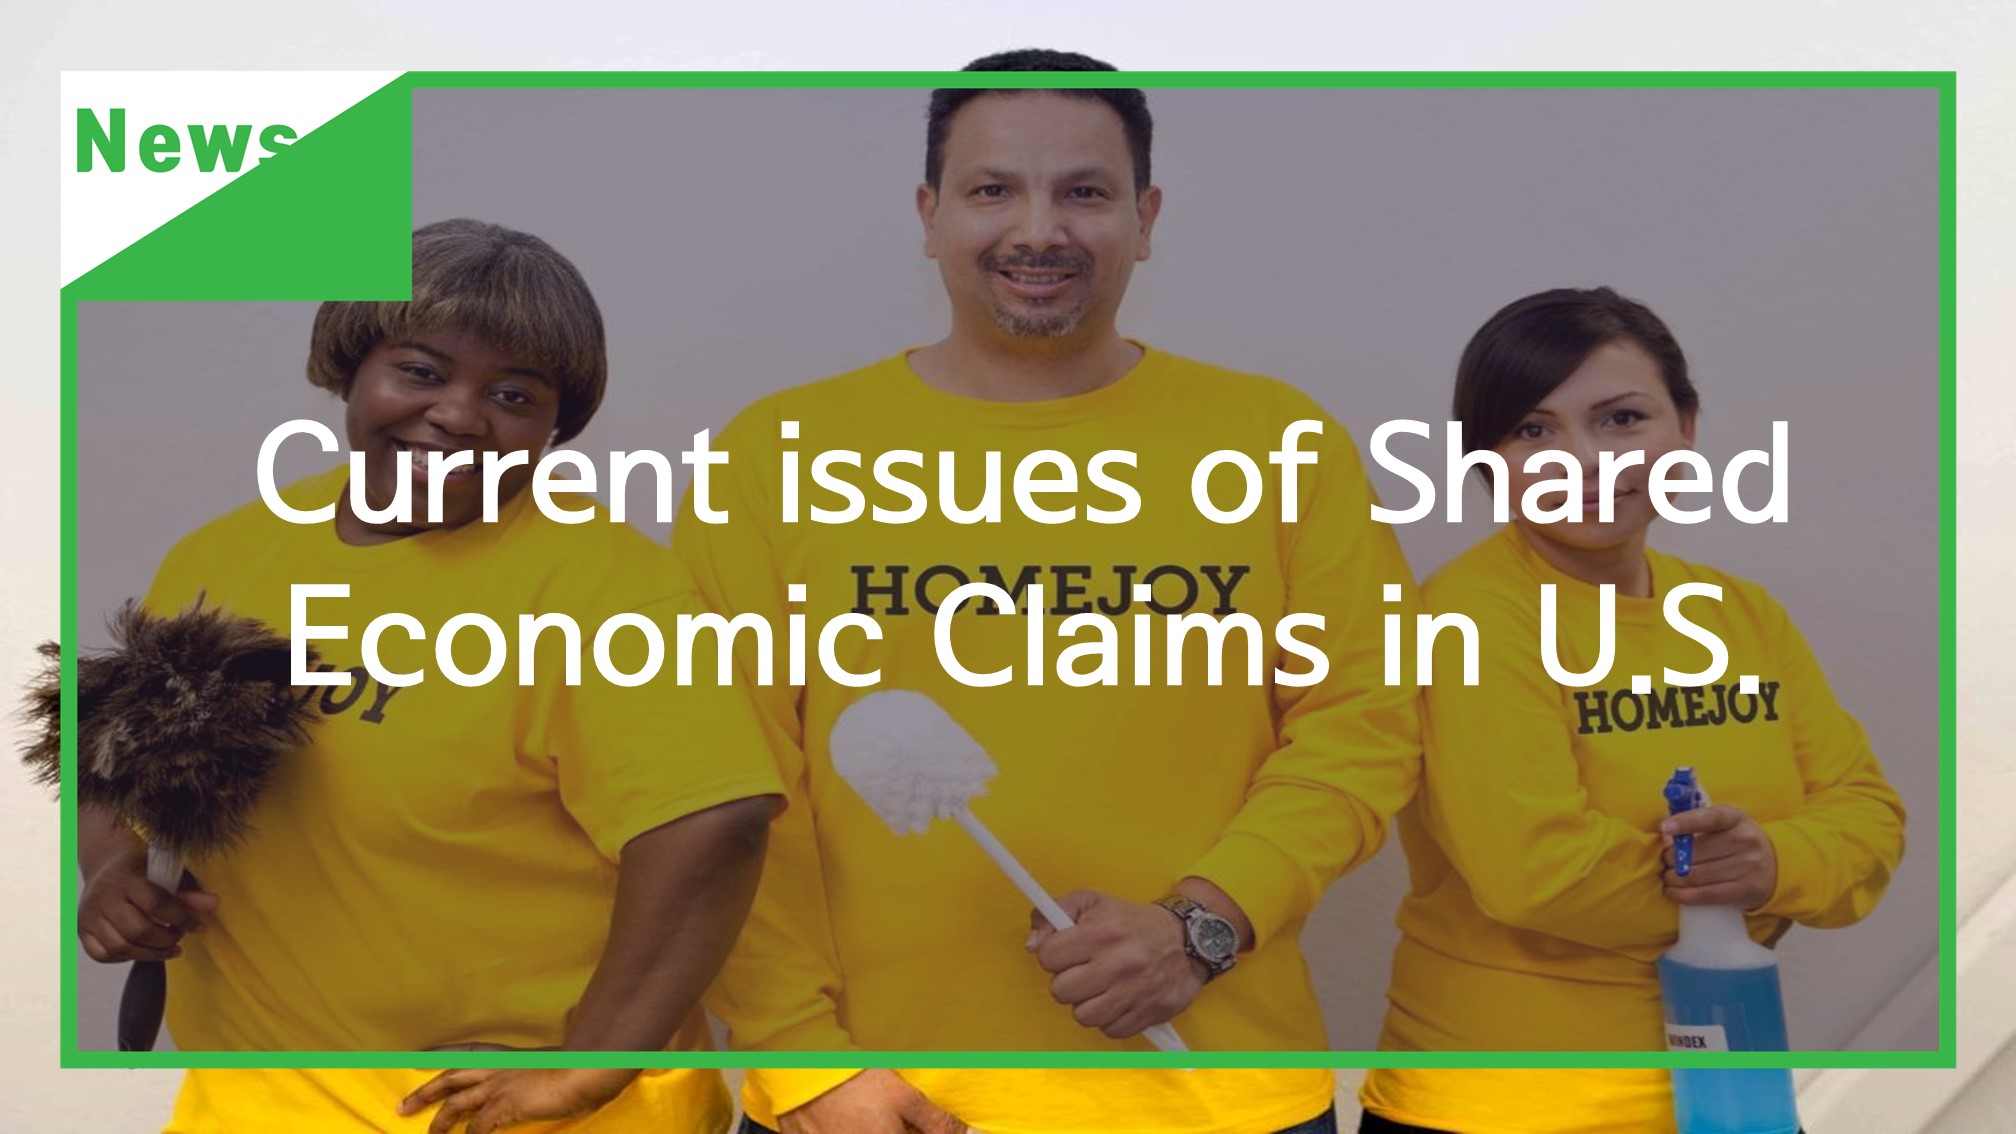 [News] Current issues of Shared Economic Claims in U.S.